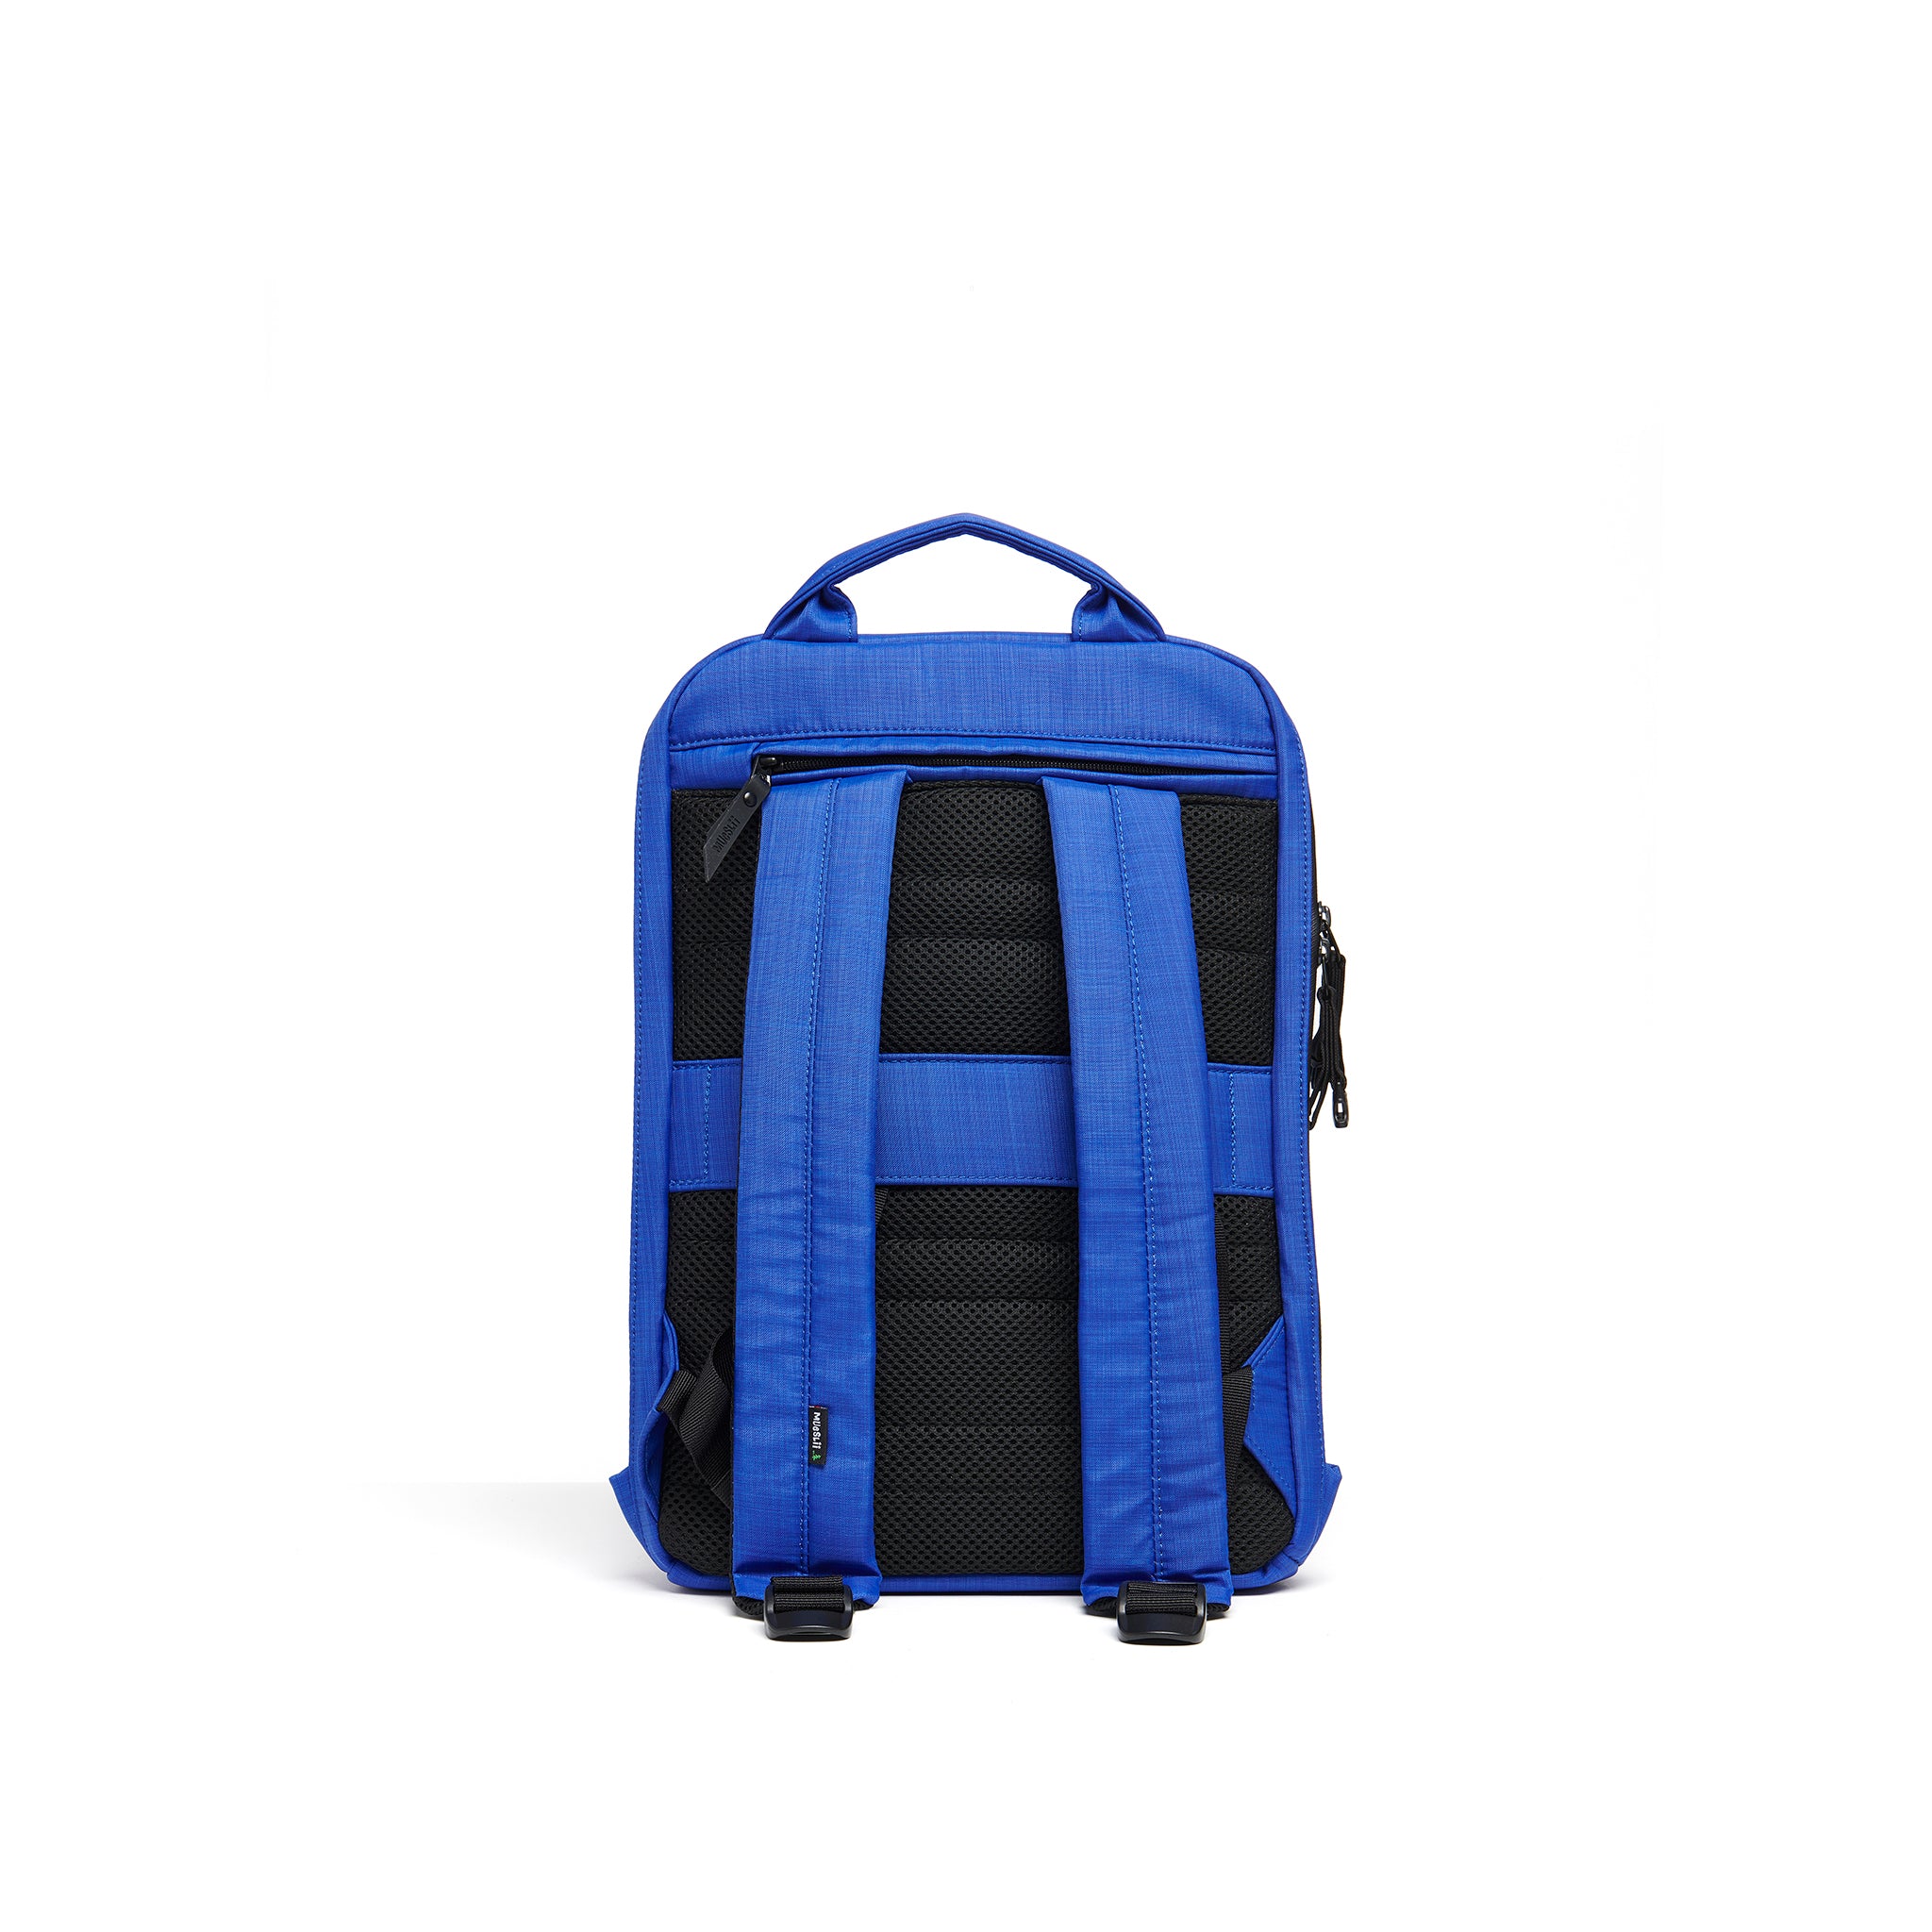 Mueslii small backpack,  made of  water resistant canvas nylon,  with a laptop compartment, color summer blue, back view.